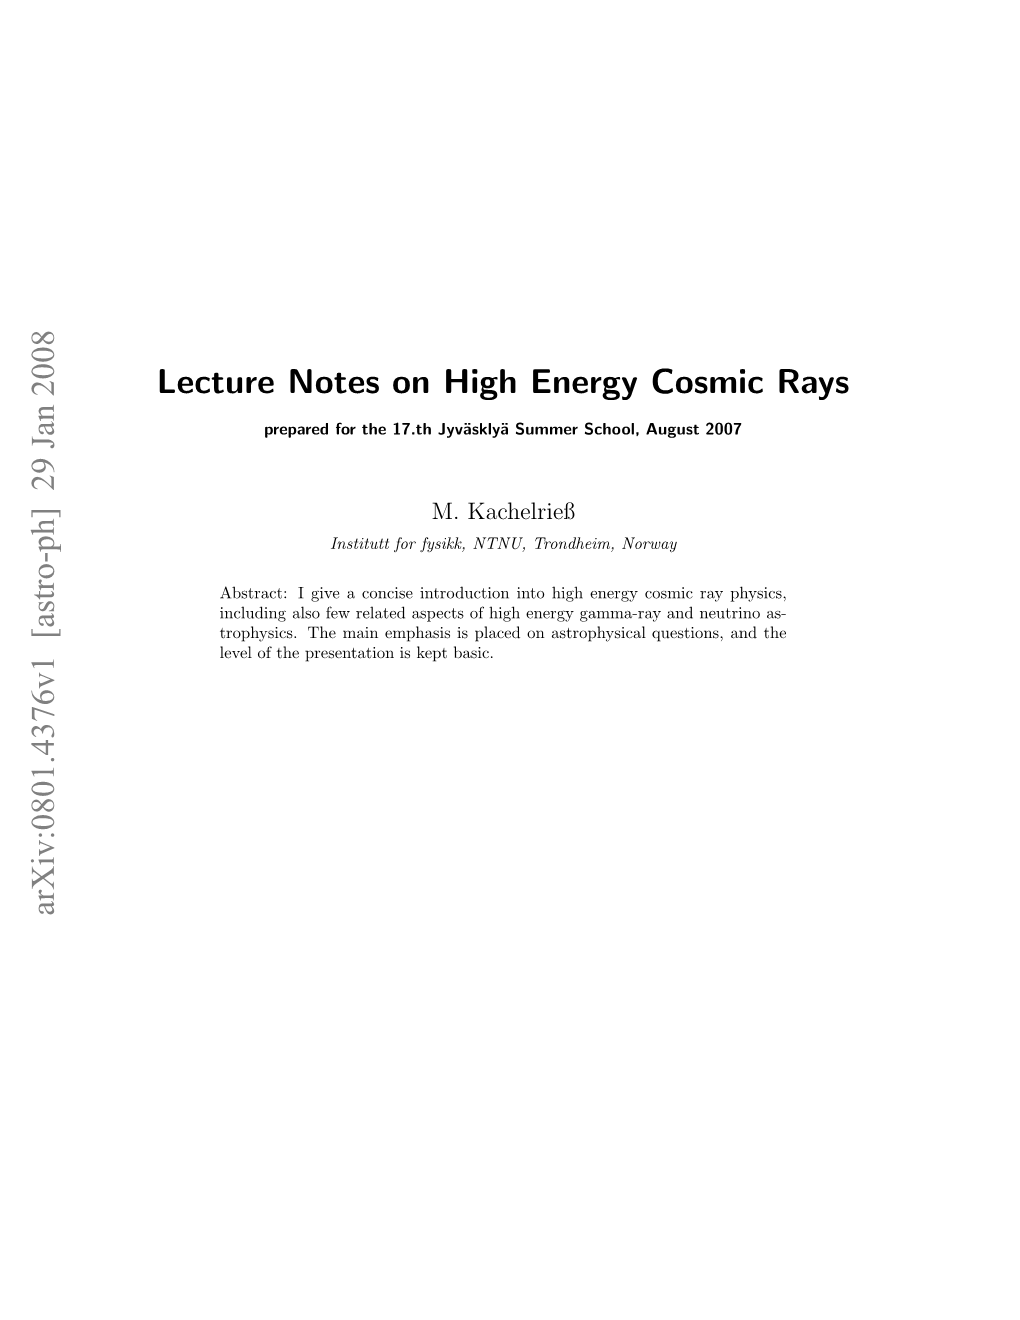 Lecture Notes on High Energy Cosmic Rays